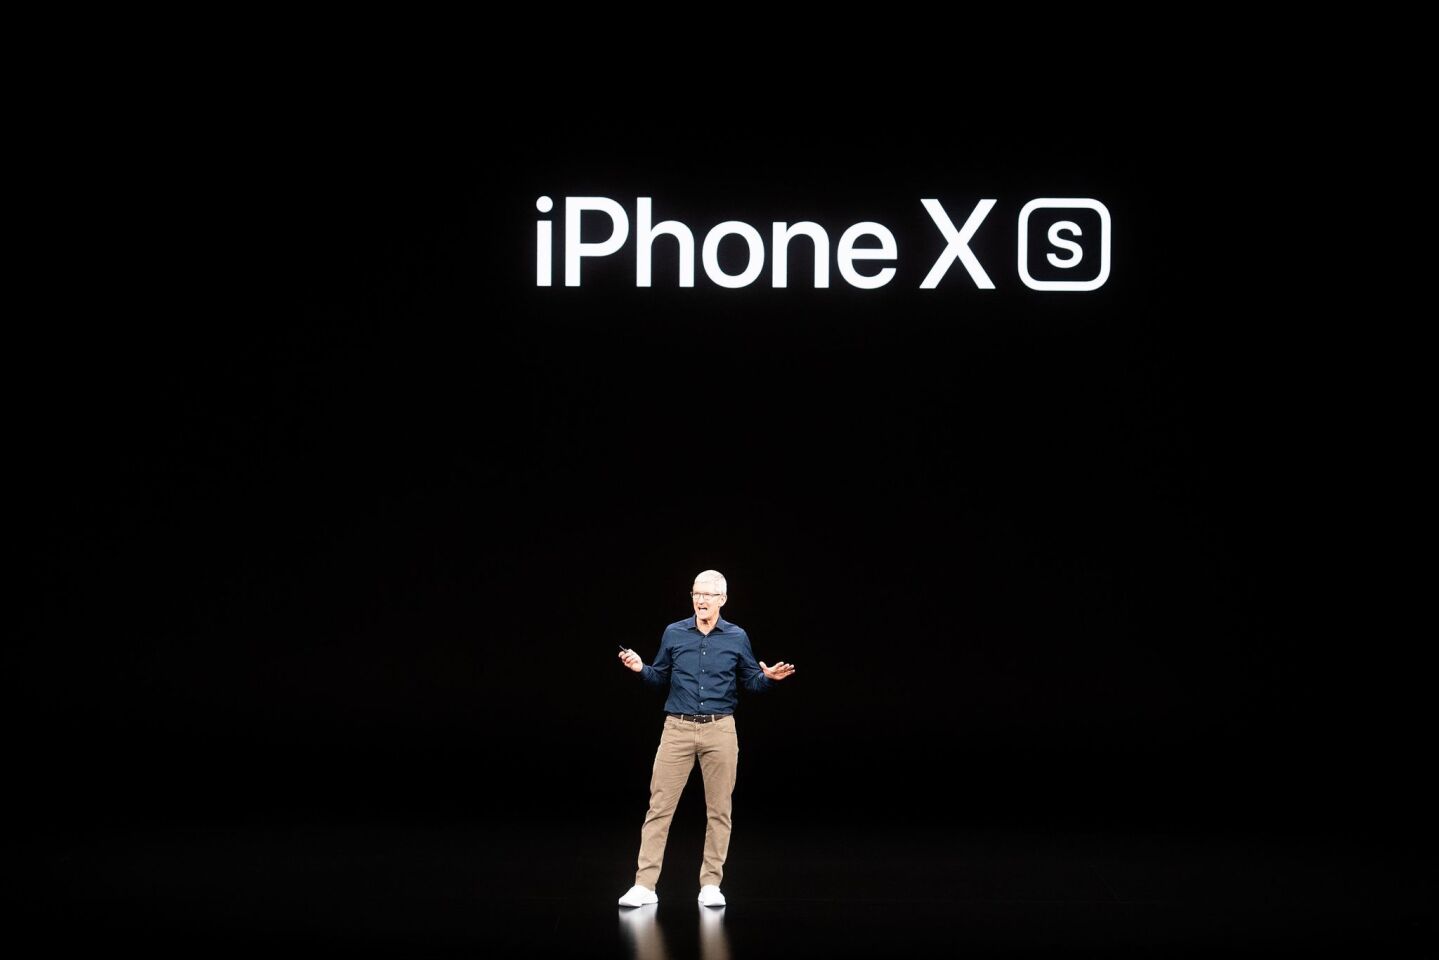 Apple CEO Tim Cook introduces the iPhone XS during an event on September 12, 2018, in Cupertino, California. - New iPhones set to be unveiled Wednesday offer Apple a chance for fresh momentum in a sputtering smartphone market as the California tech giant moves into new products and services to diversify.Apple was expected to introduce three new iPhone models at its media event at its Cupertino campus, notably seeking to strengthen its position in the premium smartphone market a year after launching its $1,000 iPhone X. (Photo by NOAH BERGER / AFP)NOAH BERGER/AFP/Getty Images ** OUTS - ELSENT, FPG, CM - OUTS * NM, PH, VA if sourced by CT, LA or MoD **